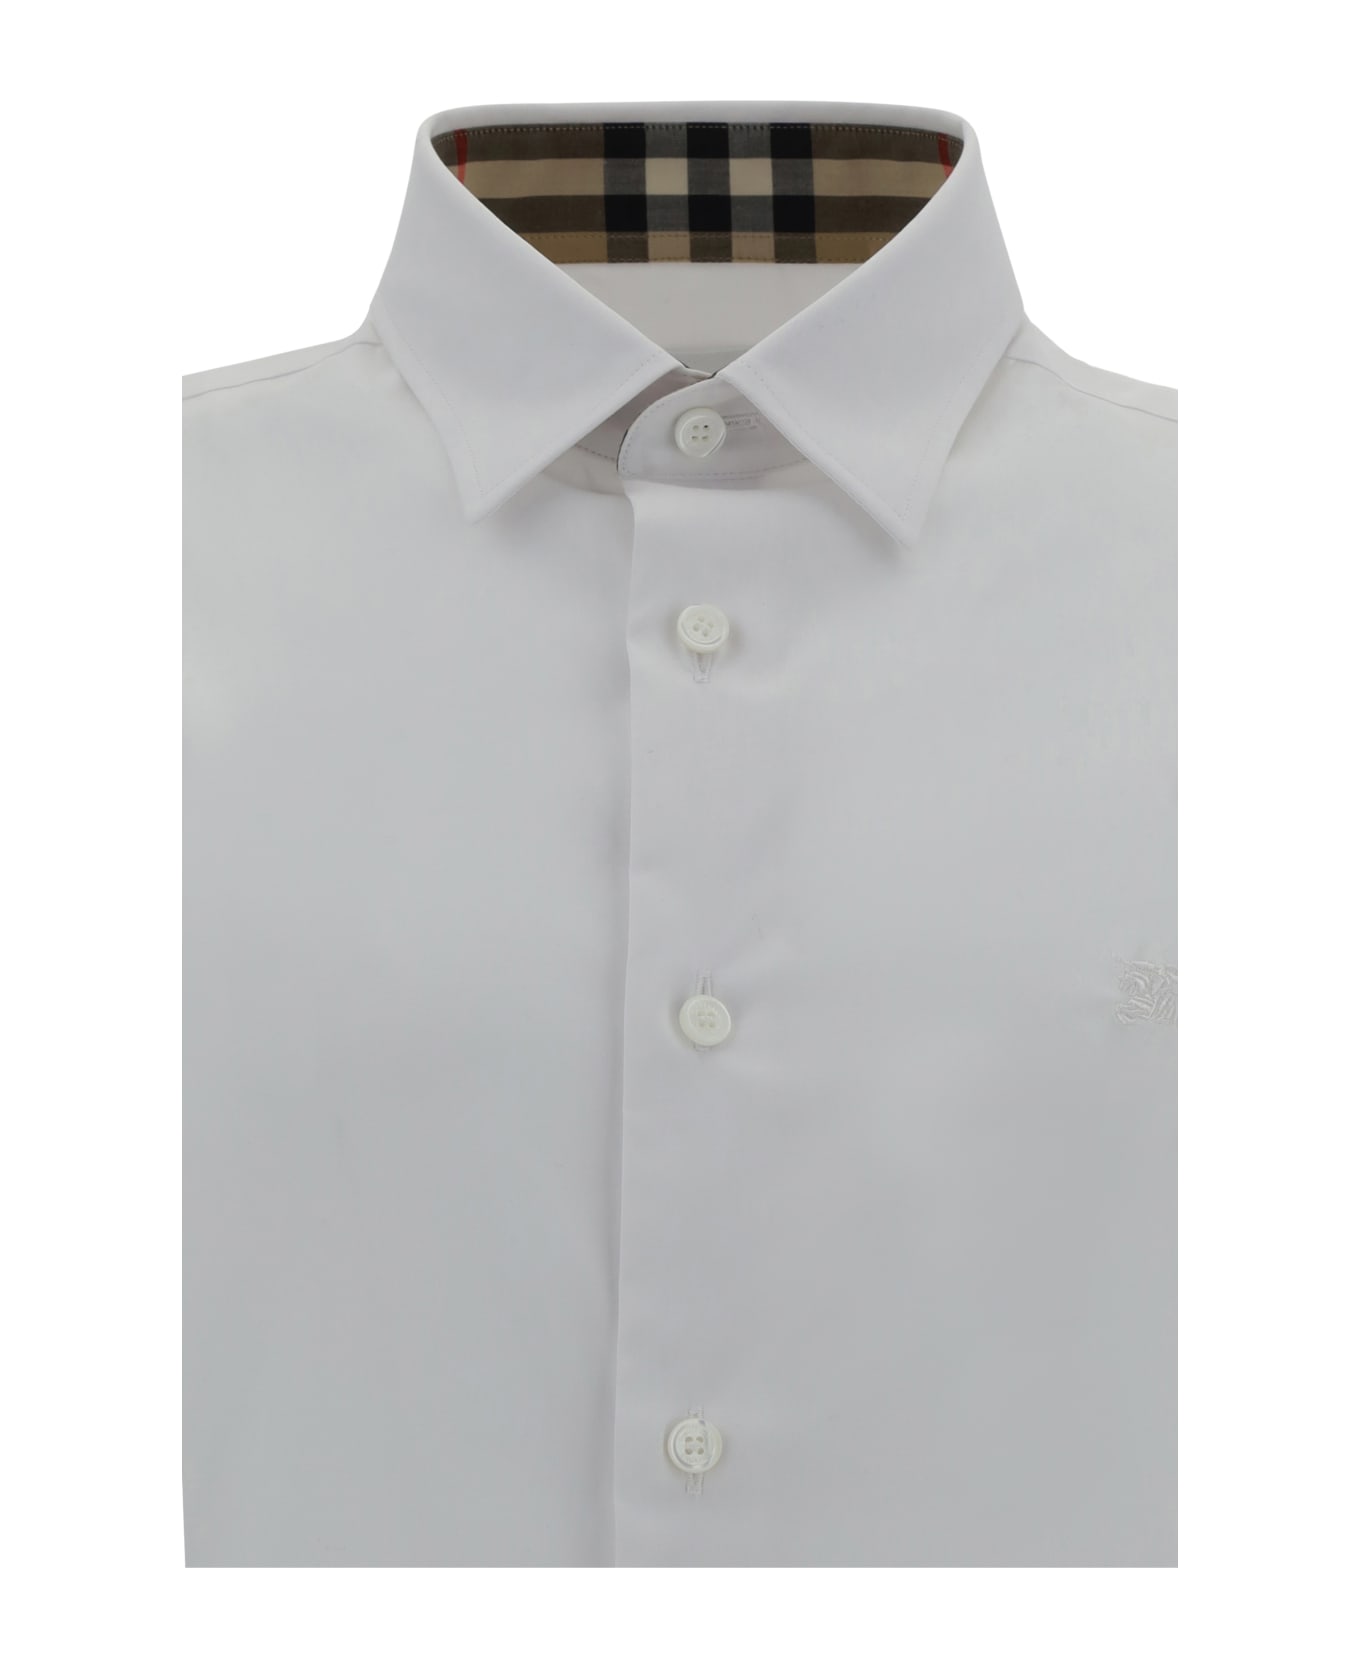 Burberry Sherfield Shirt In White Cotton - White